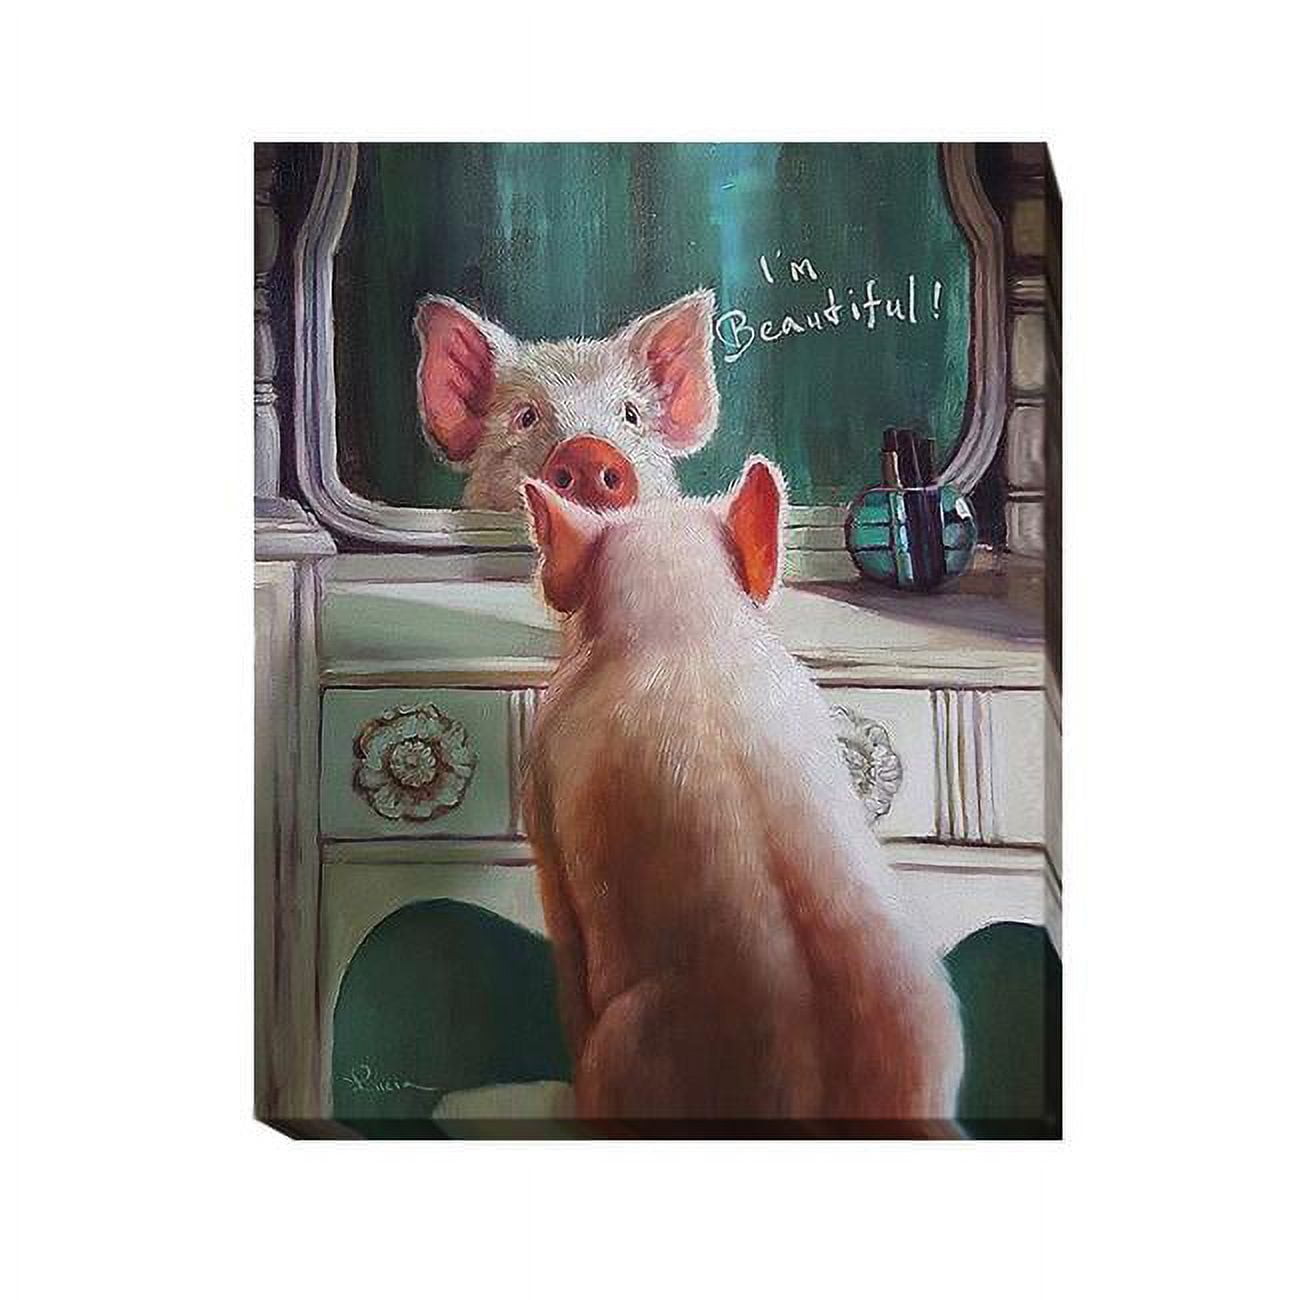 1215k5692g Affirmation By Lucia Heffernan Premium Gallery-wrapped Canvas Giclee Art - 12 X 15 X 1.5 In.